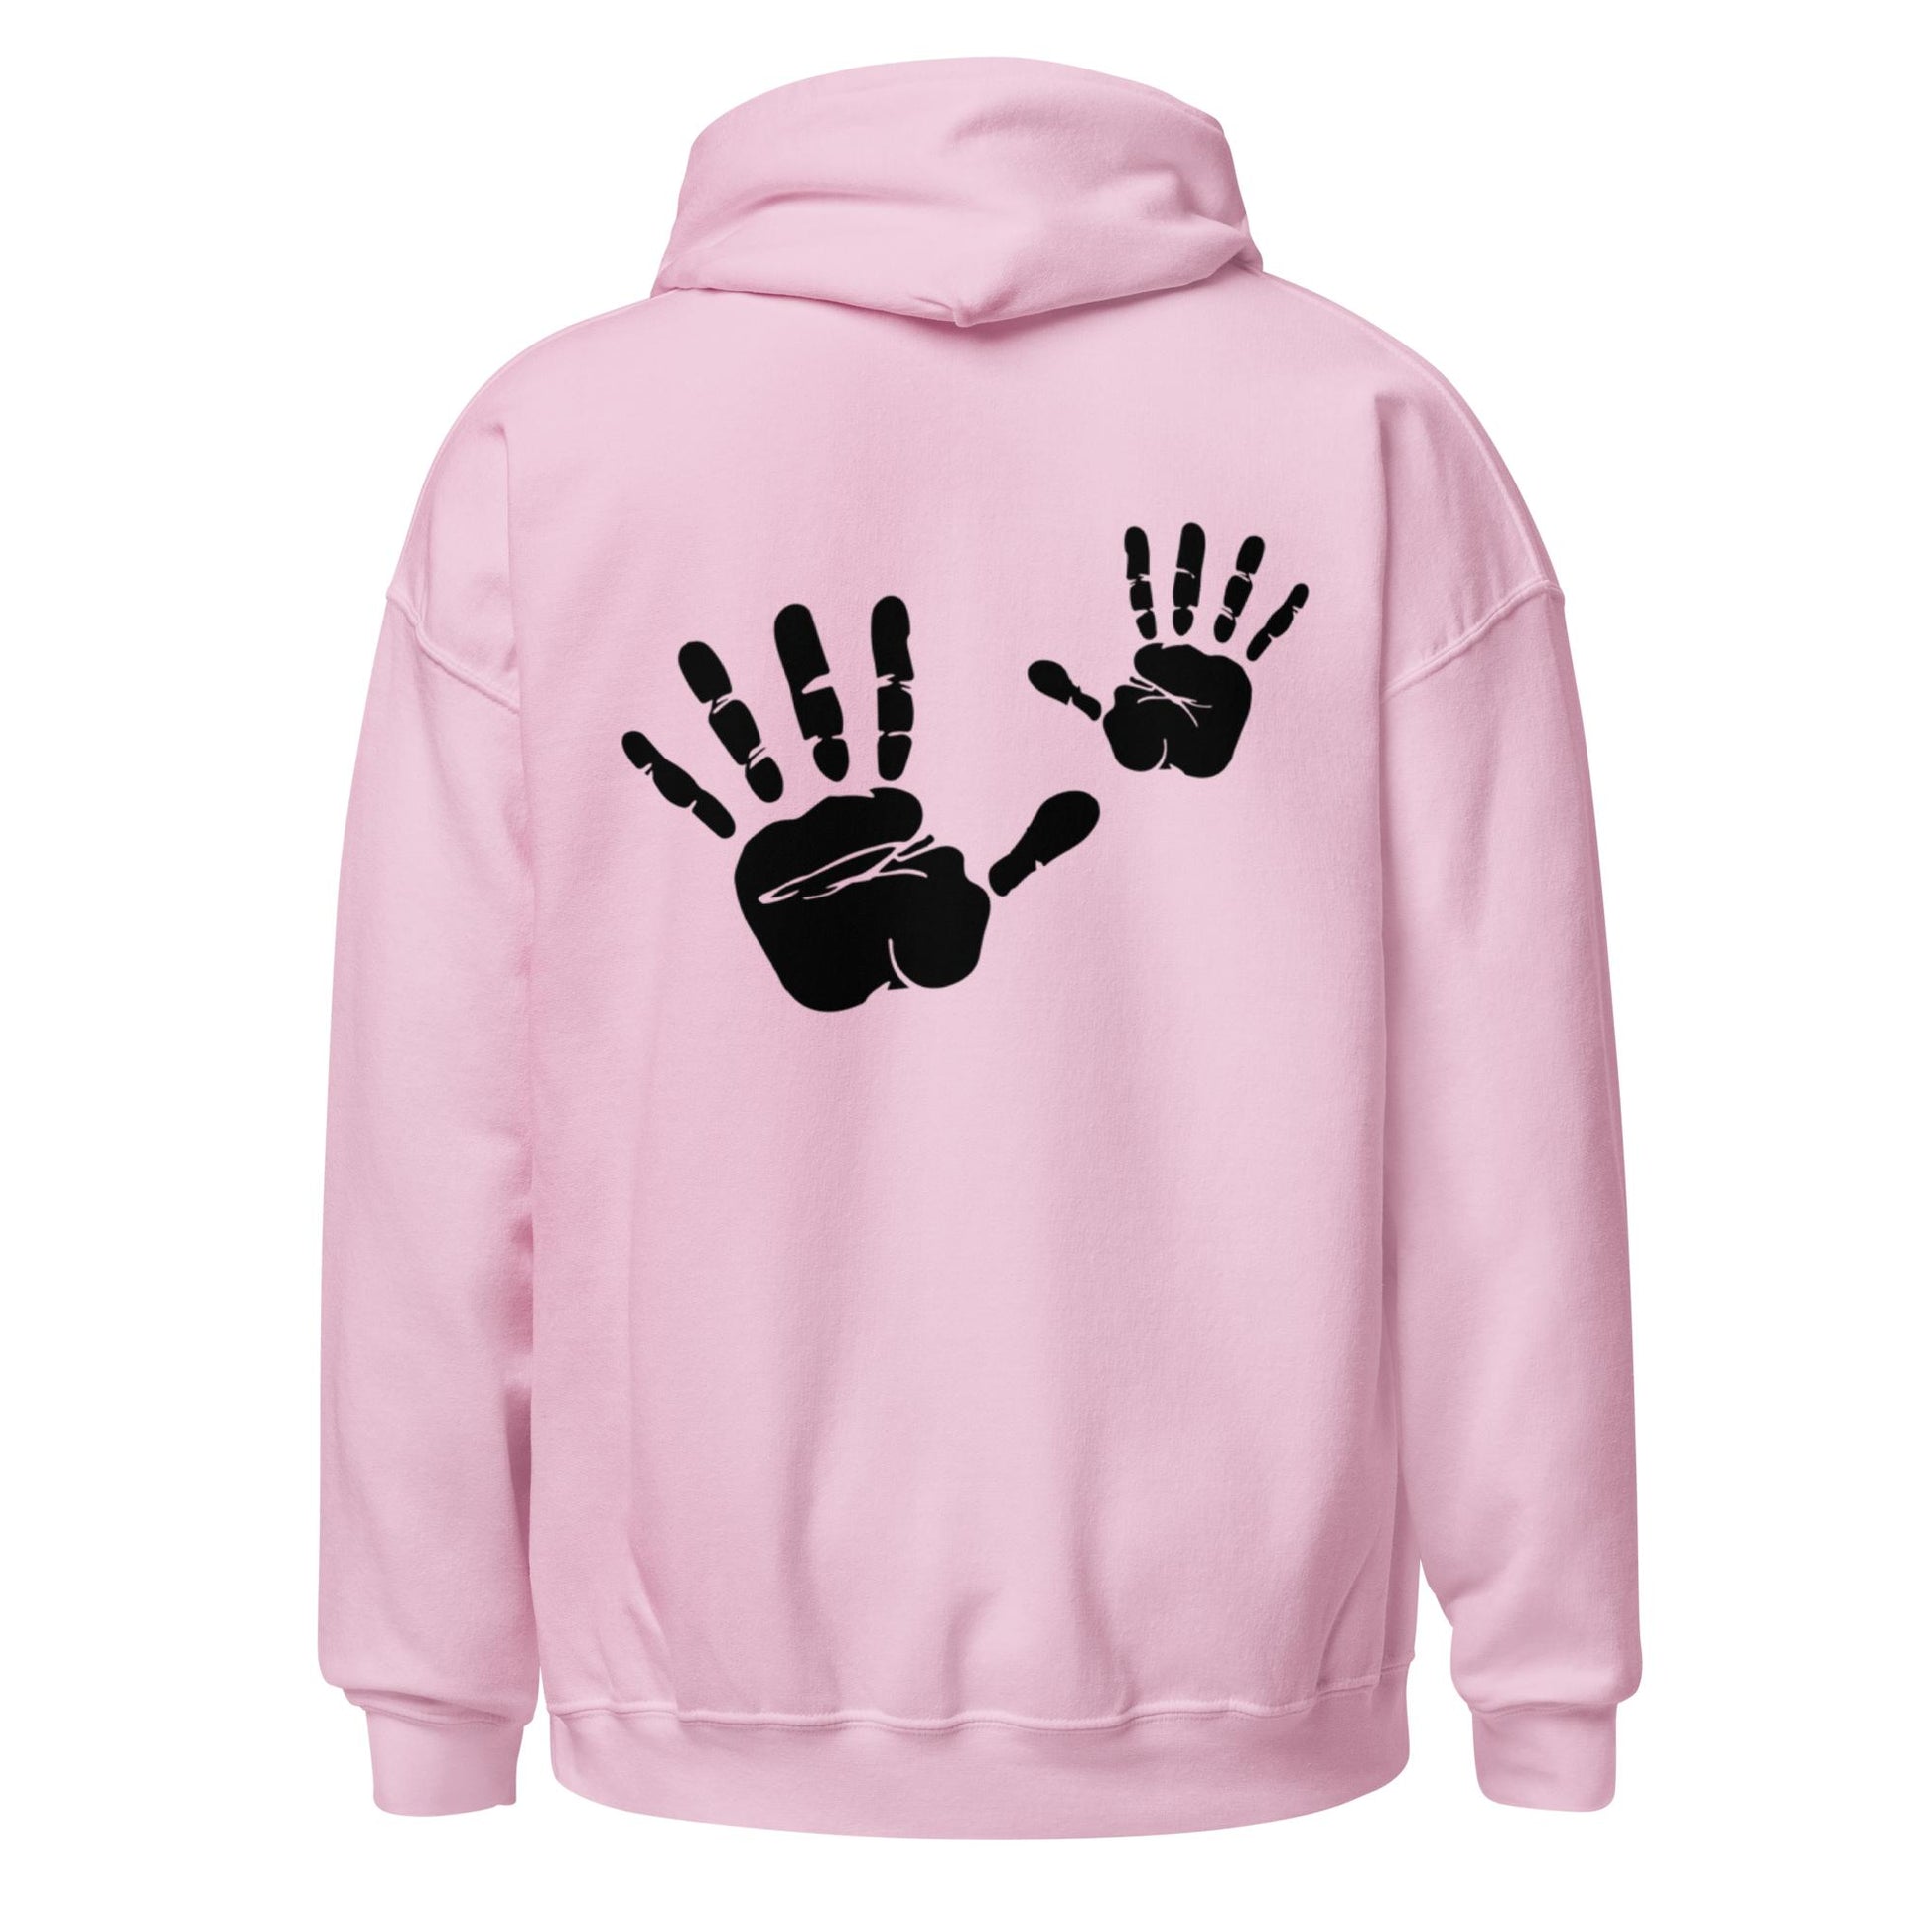 Hold Up - Handprint Unisex Hoodie | Pullover Jumpers | UNRSVD Beauty